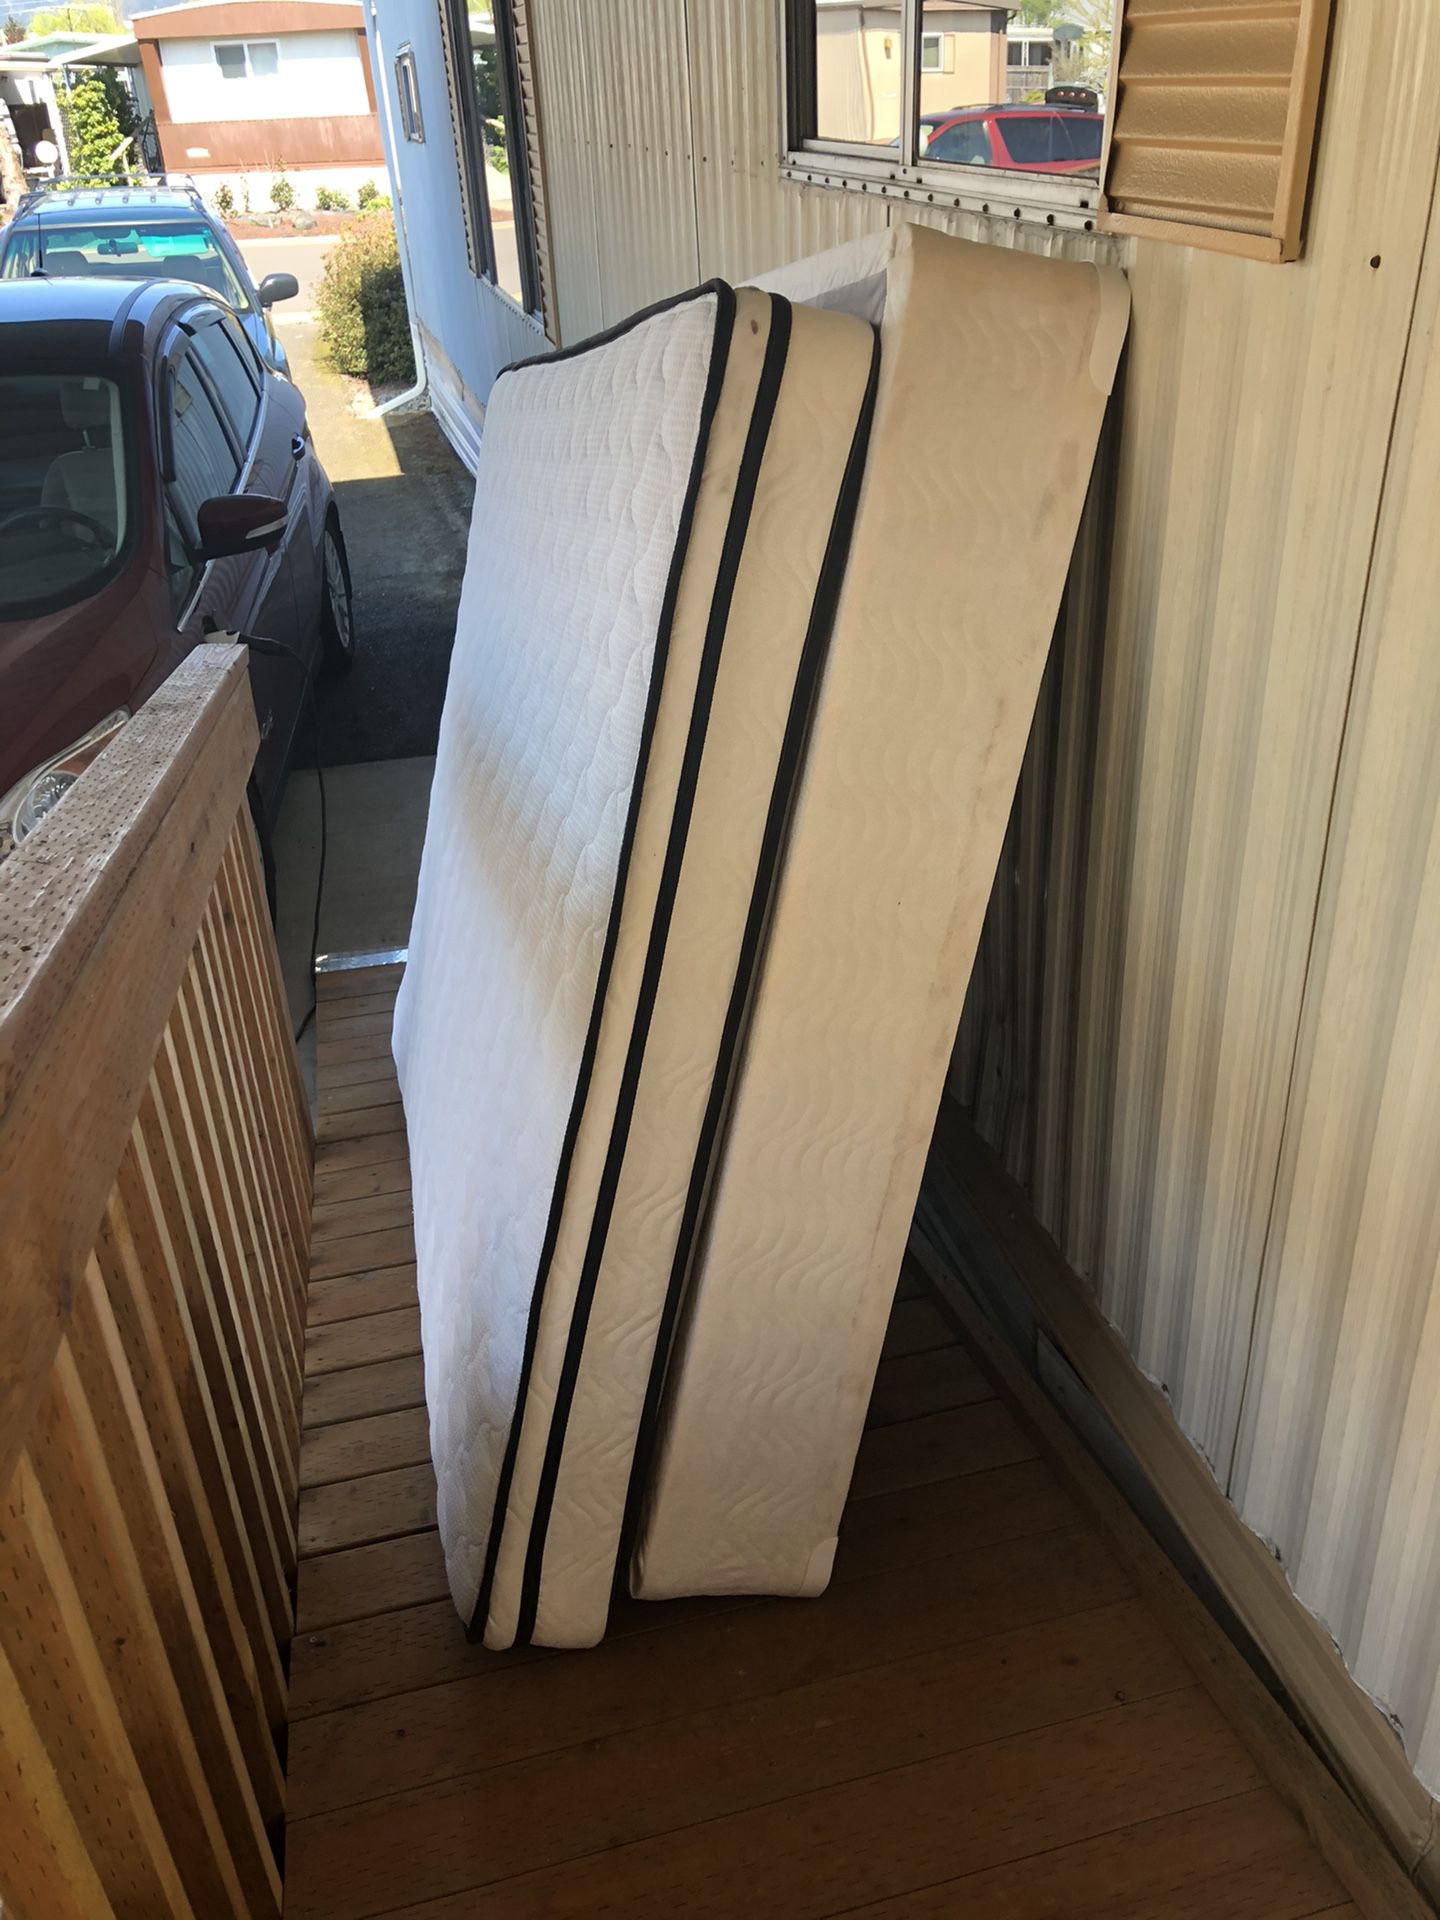 Great queen mattress and box springs. Clean. 3 months old. No stains. In Newberg